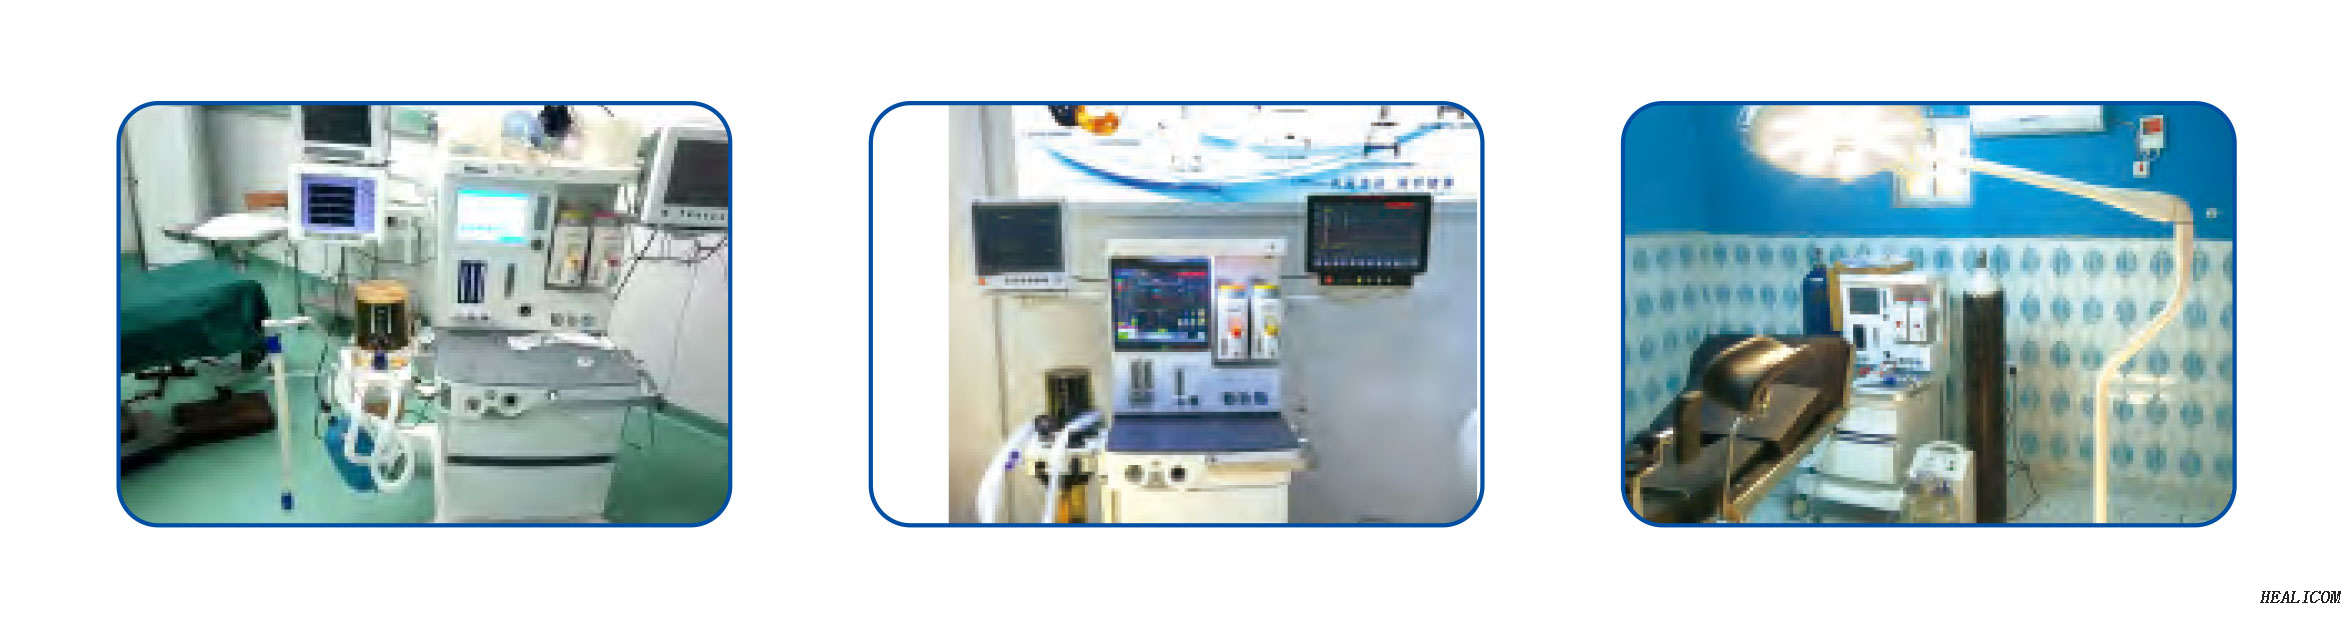 Hot sale Healicom HA-6100 Plus Anesthesia Machine Systems patient Anesthesia Equipment 